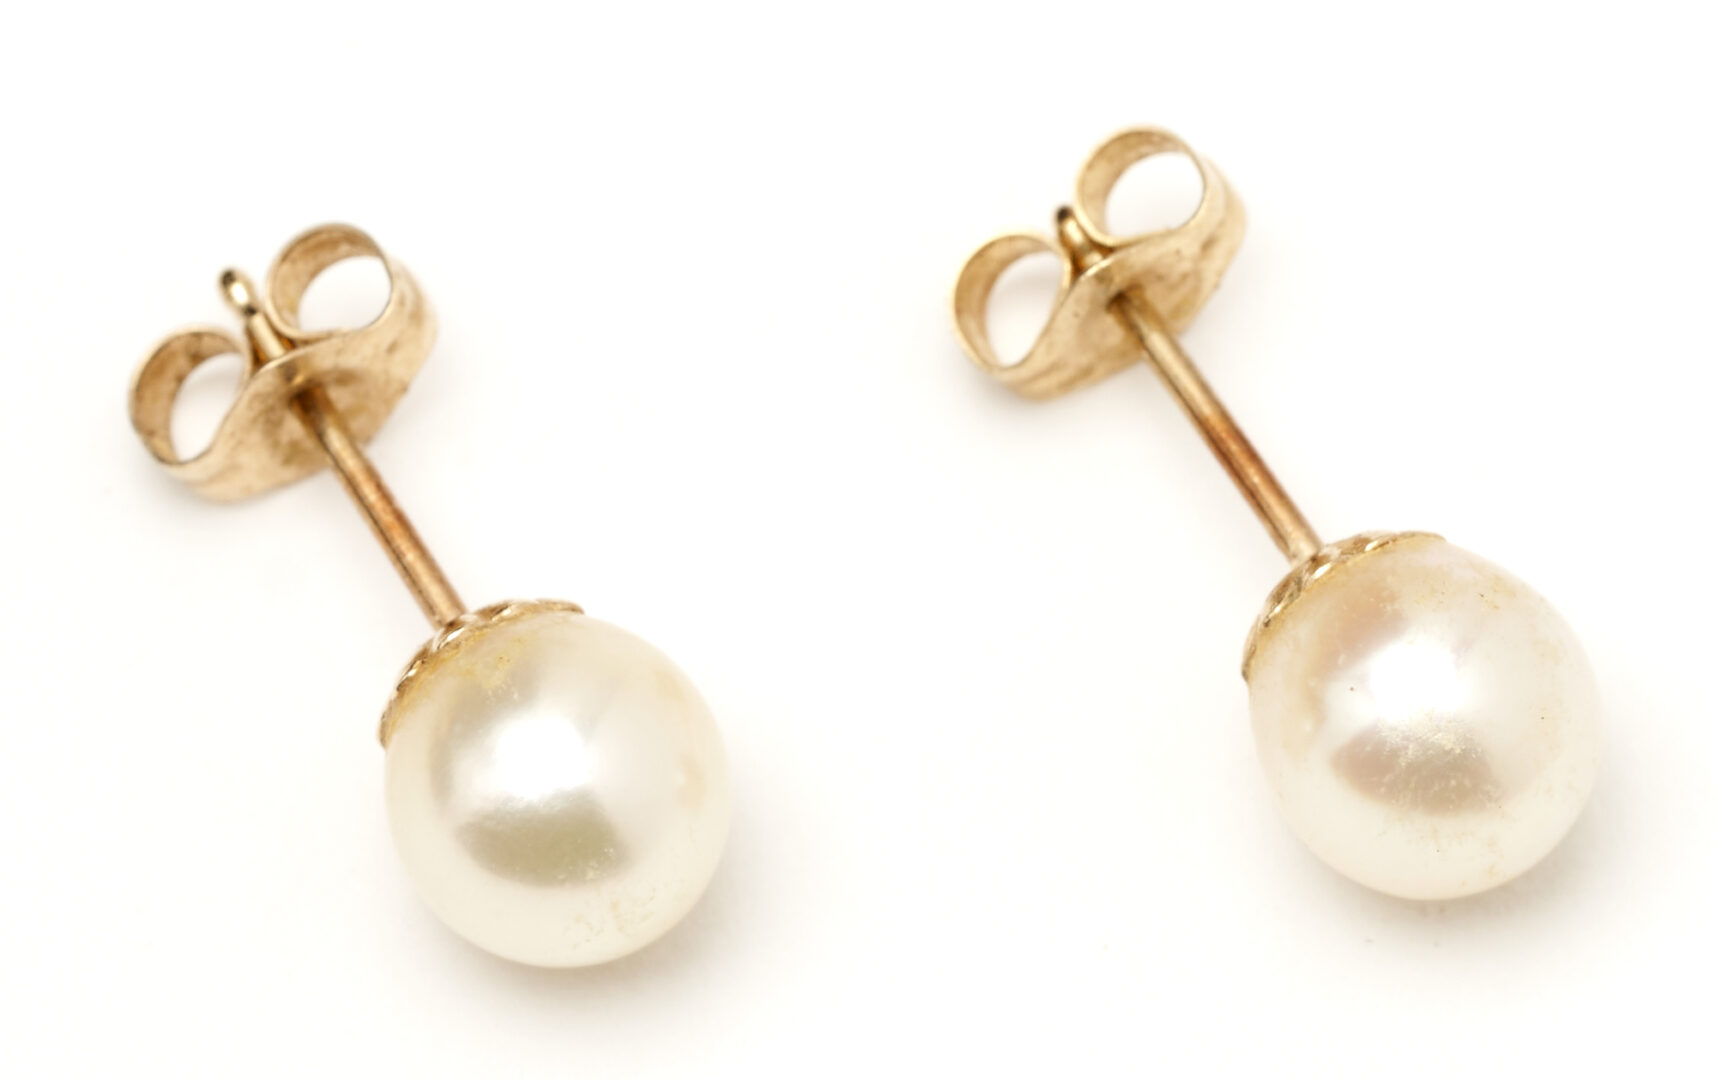 Lot 1057: 2 Pearl Necklaces, 1 Pair of Pearl Earrings & Judith Lieber Swarovski Lipstick Case